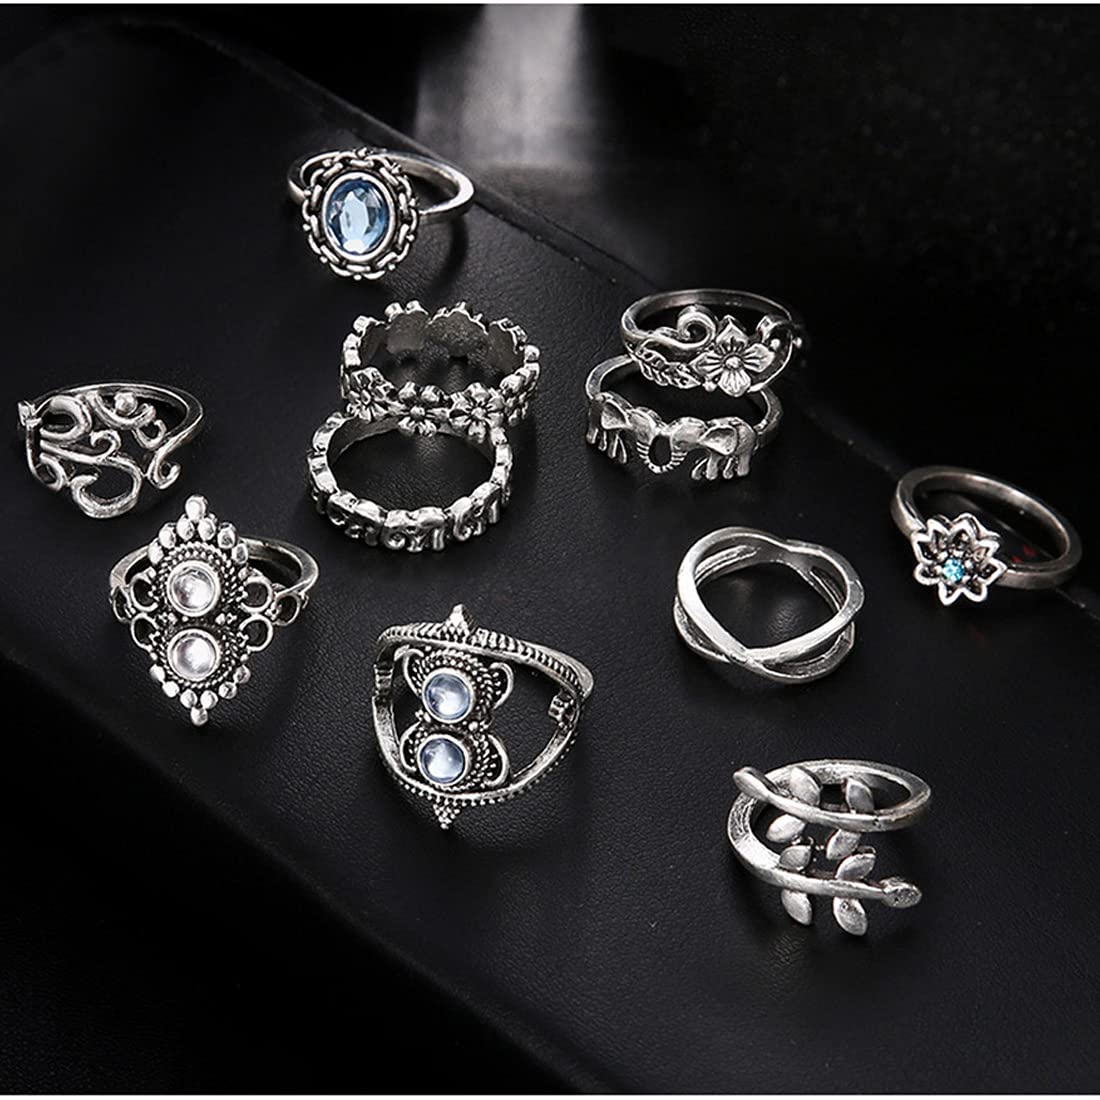 Yellow Chimes 11 Pieces Combo Studded Stone Design Vintage Style Midi Finger Silver Oxidised Knuckle Rings Set for Women and Girls (Model: YCFJRG-87STOXDN-C-SL)